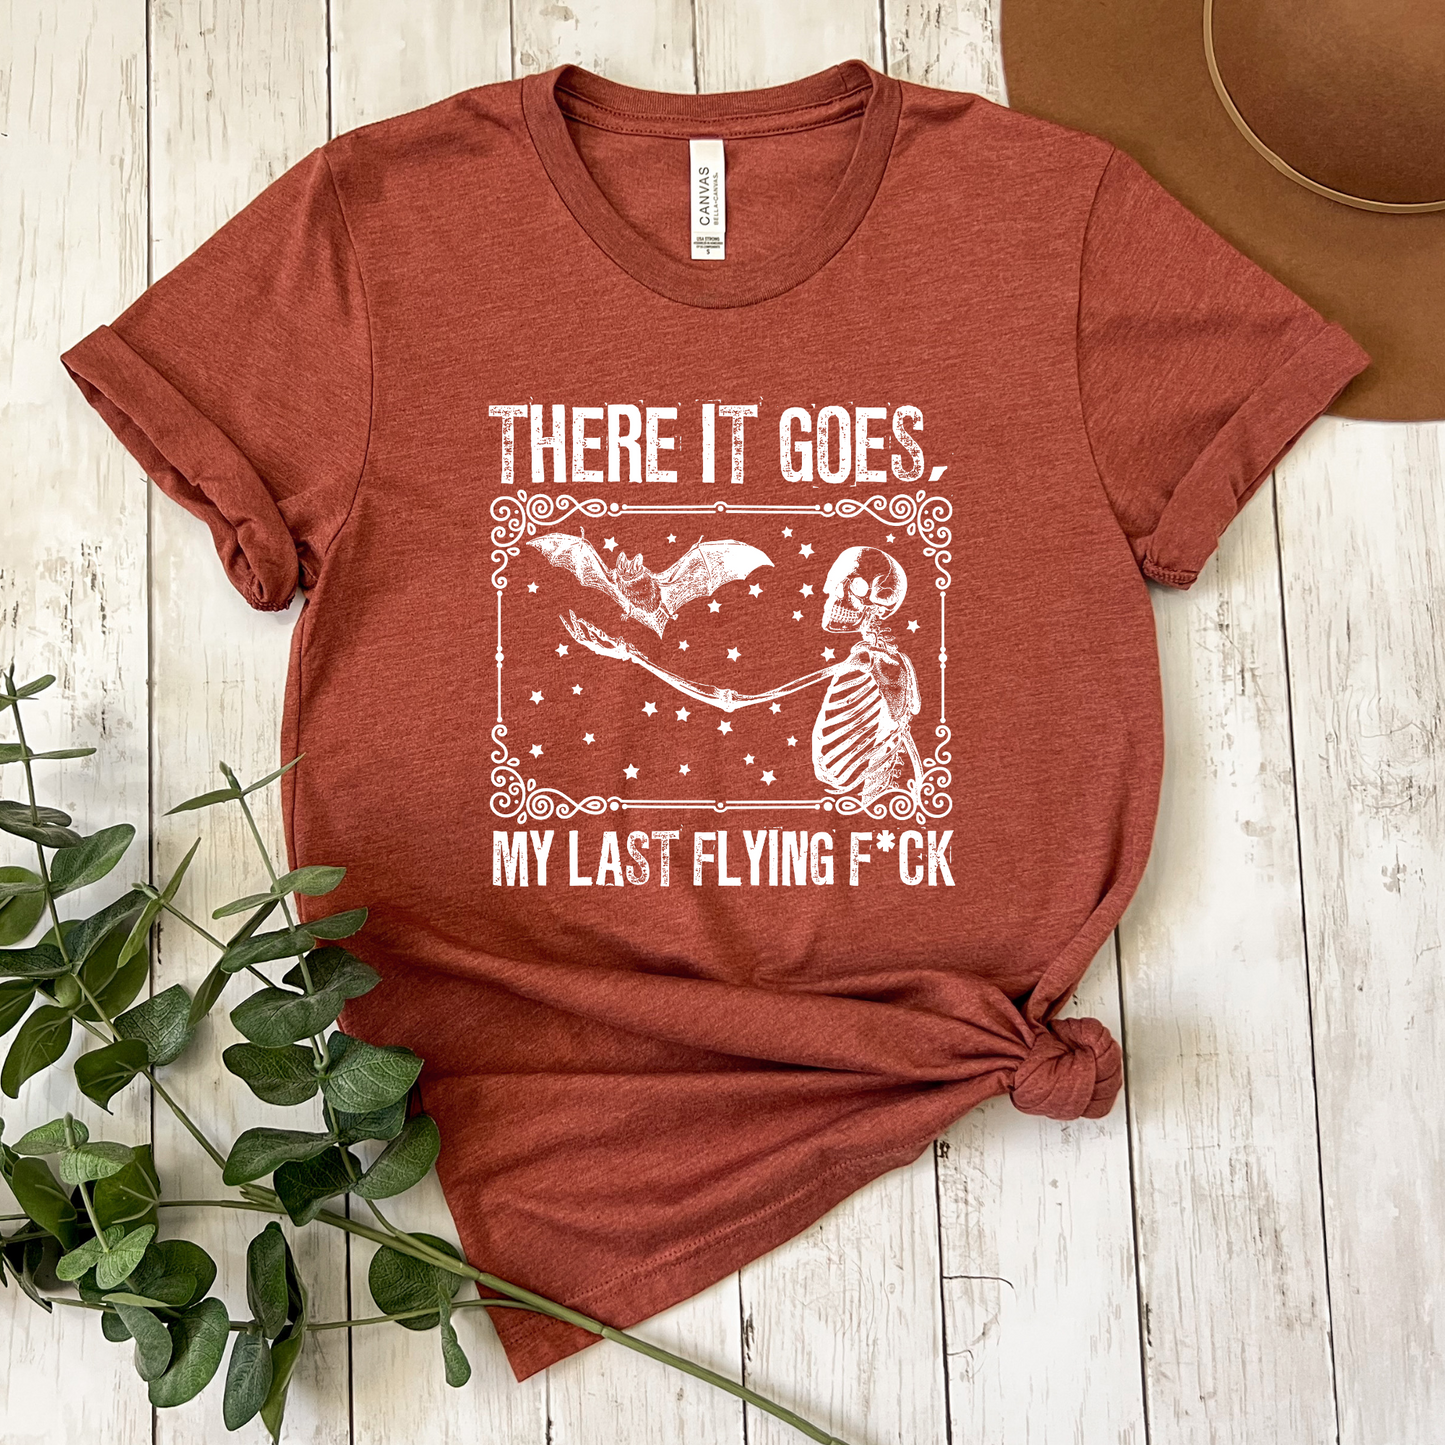 There It Goes My Last Flying F*ck T-Shirt